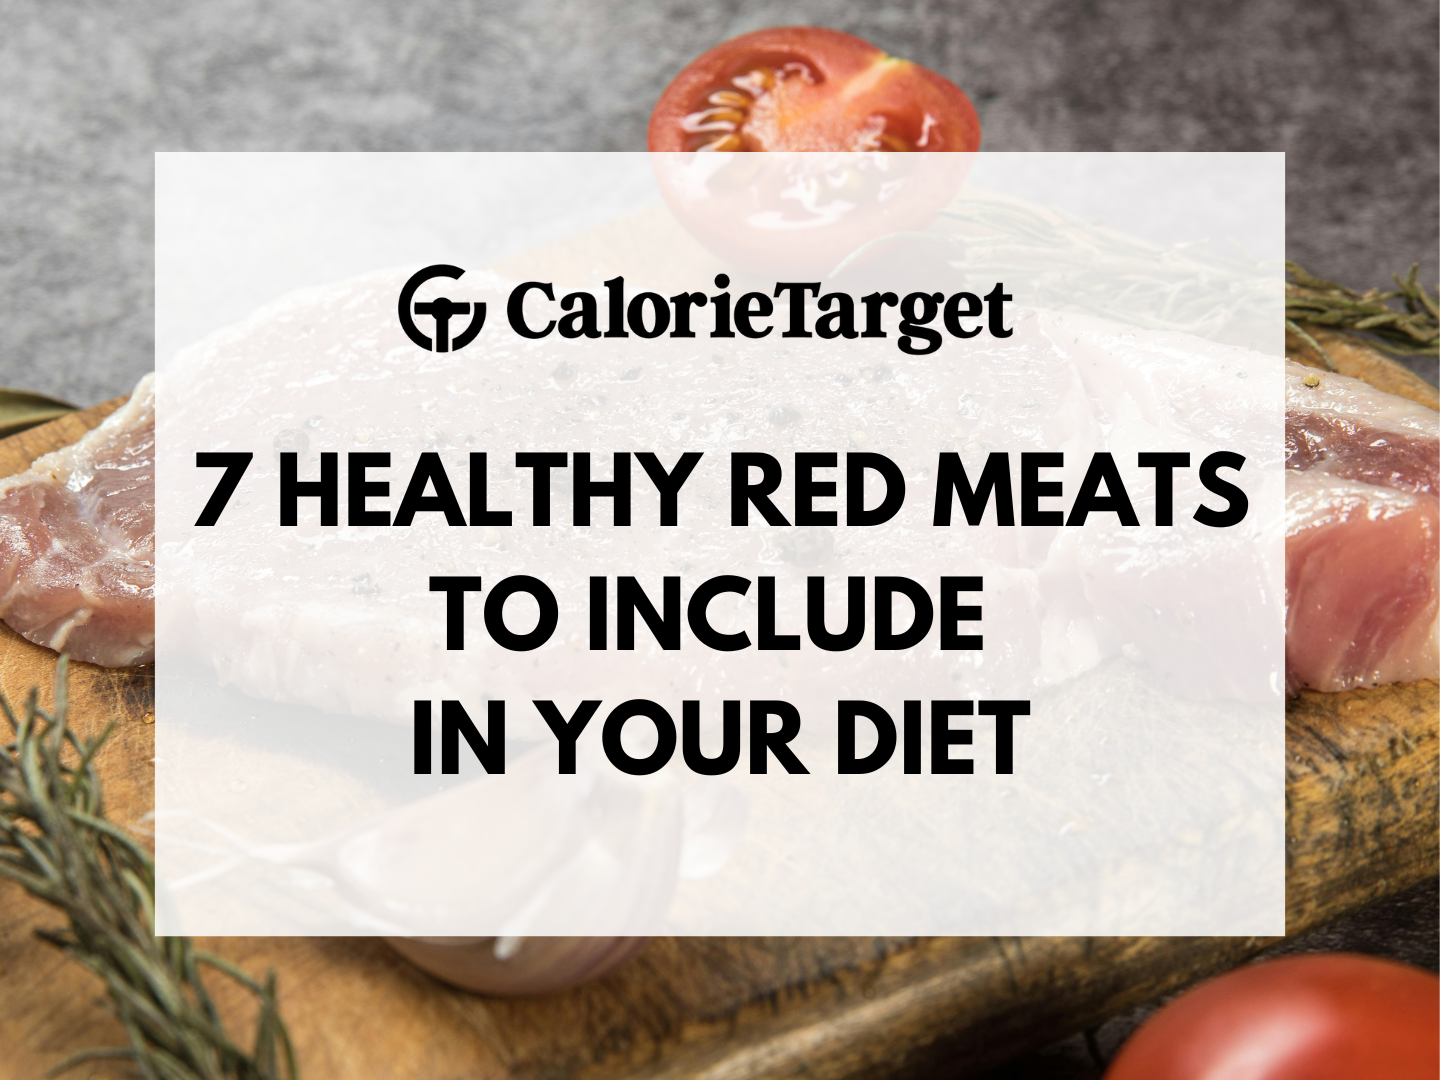 7 healthy red meats to include in your diet